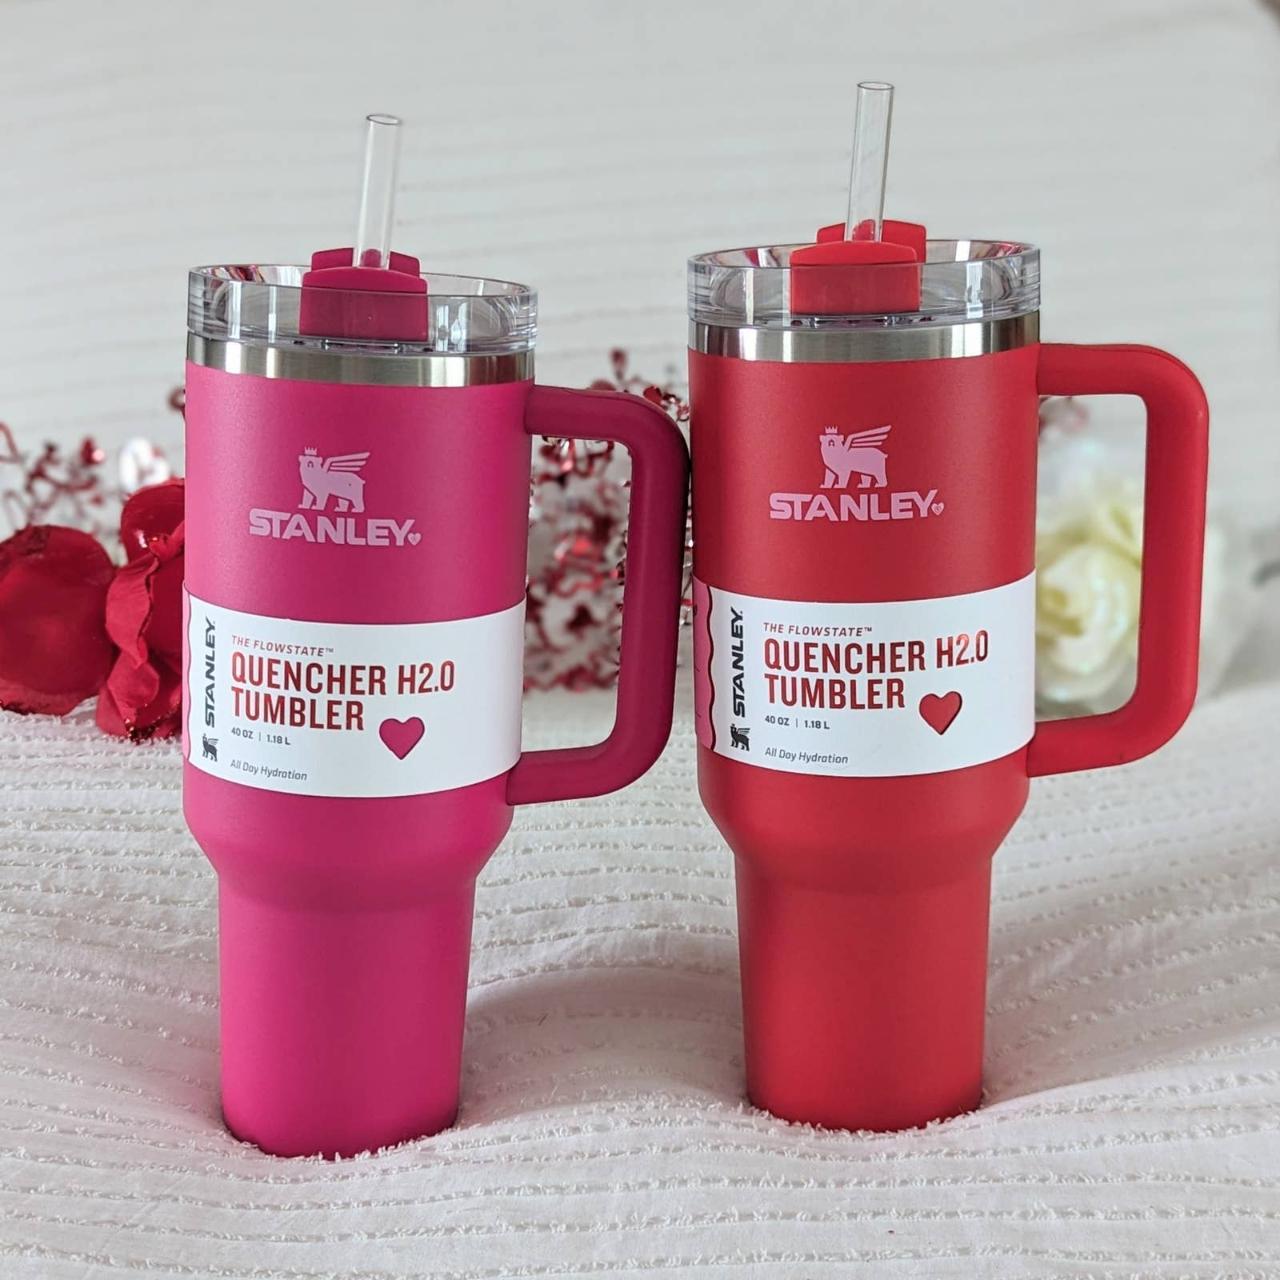 NEW Hot Pink cosmo Pink Valentine's Day Stanley Target Exclusive